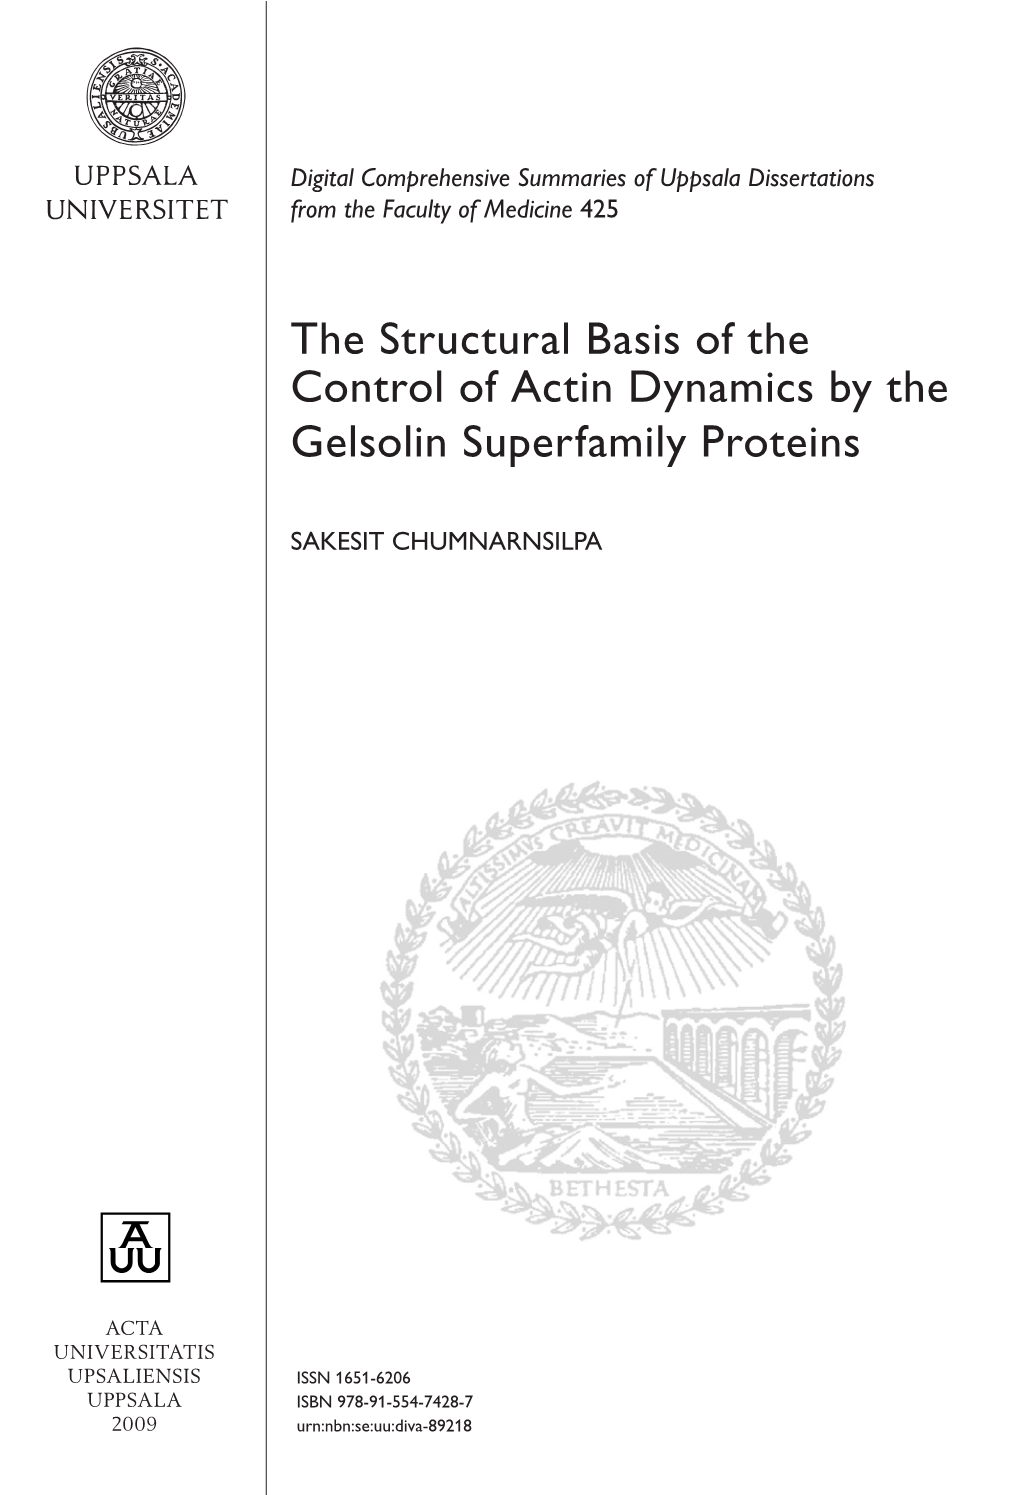 The Structural Basis of the Control of Actin Dynamics by the Gelsolin Superfamily Proteins